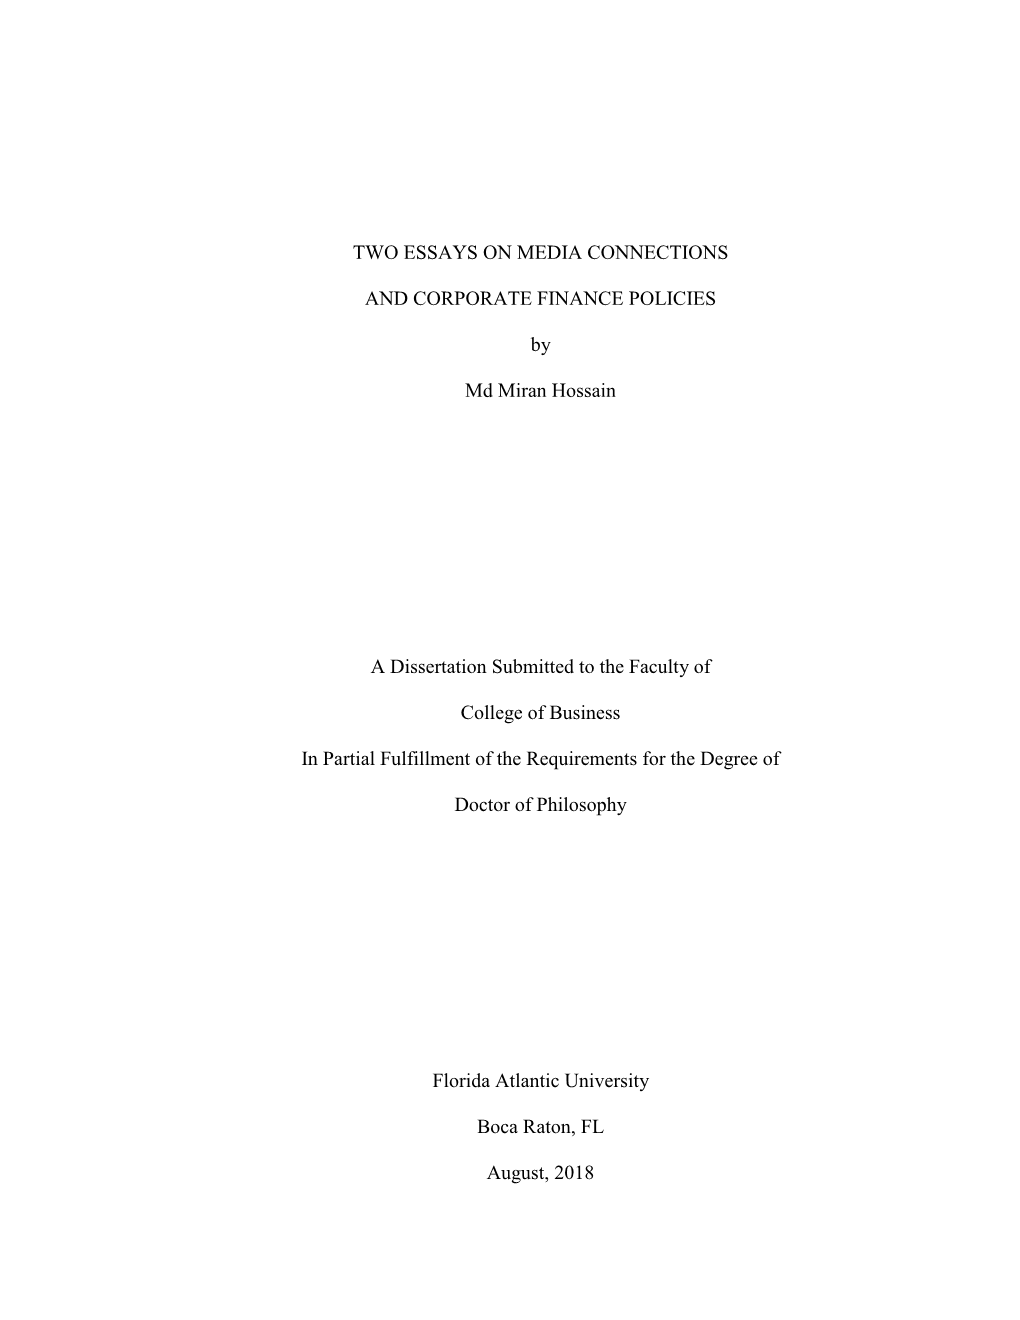 Two Essays on Media Connections and Corporate Finance Policies